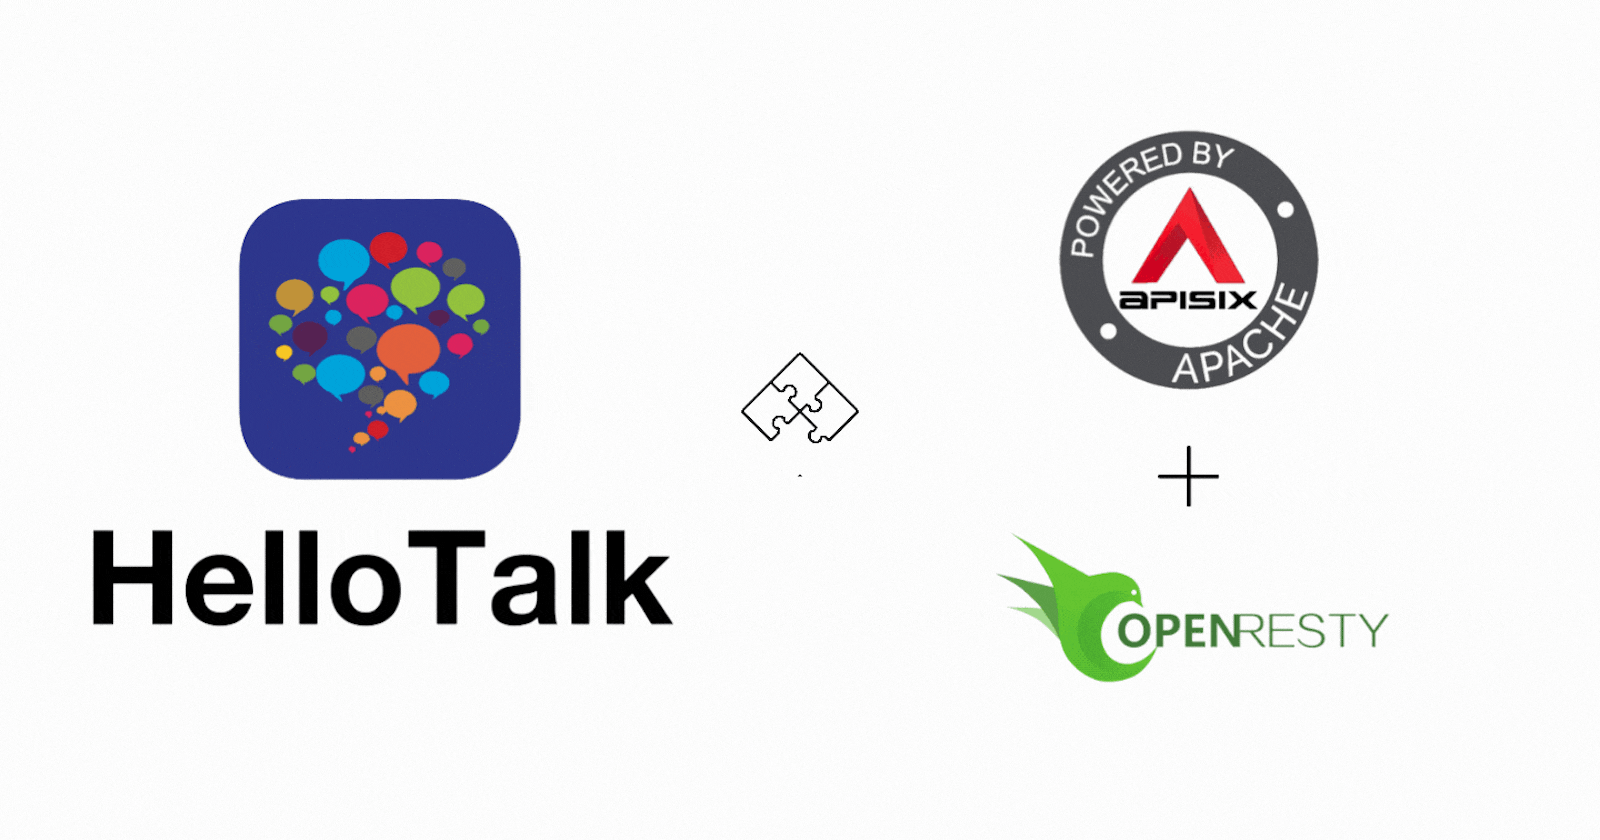 HelloTalk: Leveraging Apache APISIX and OpenResty